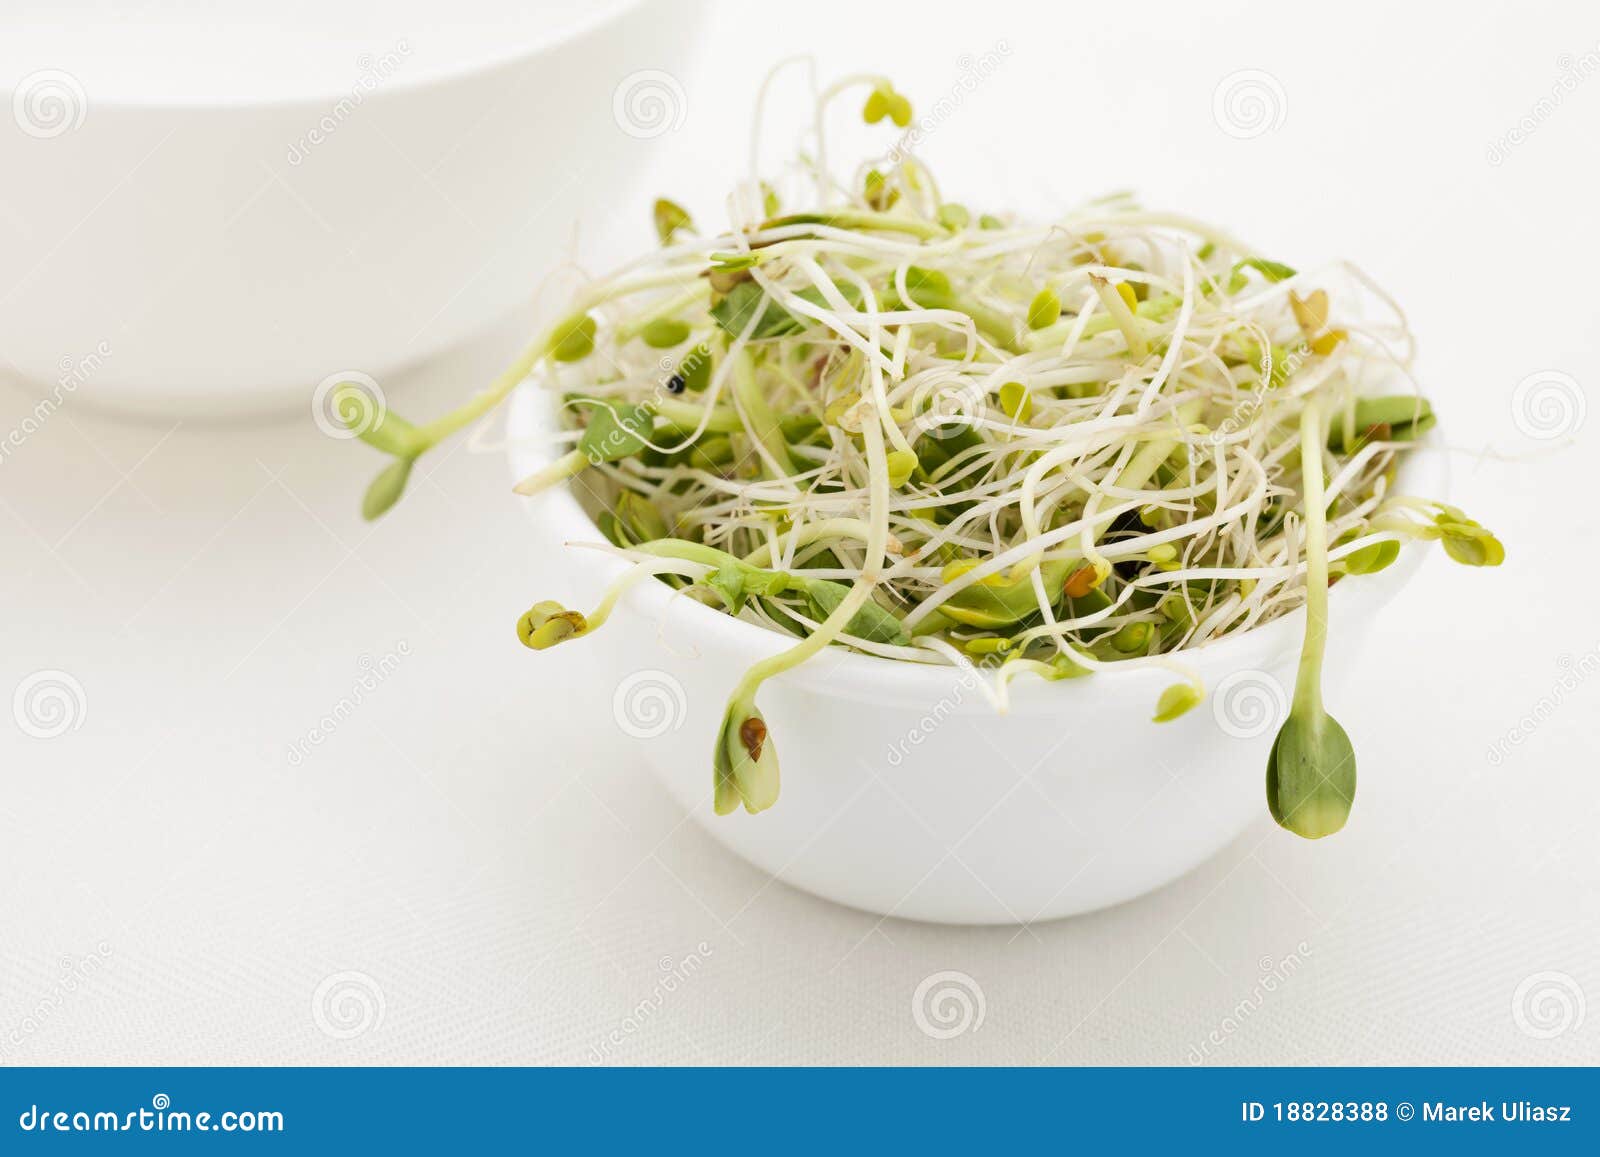 sprout-mix-white-bowl-18828388.jpg